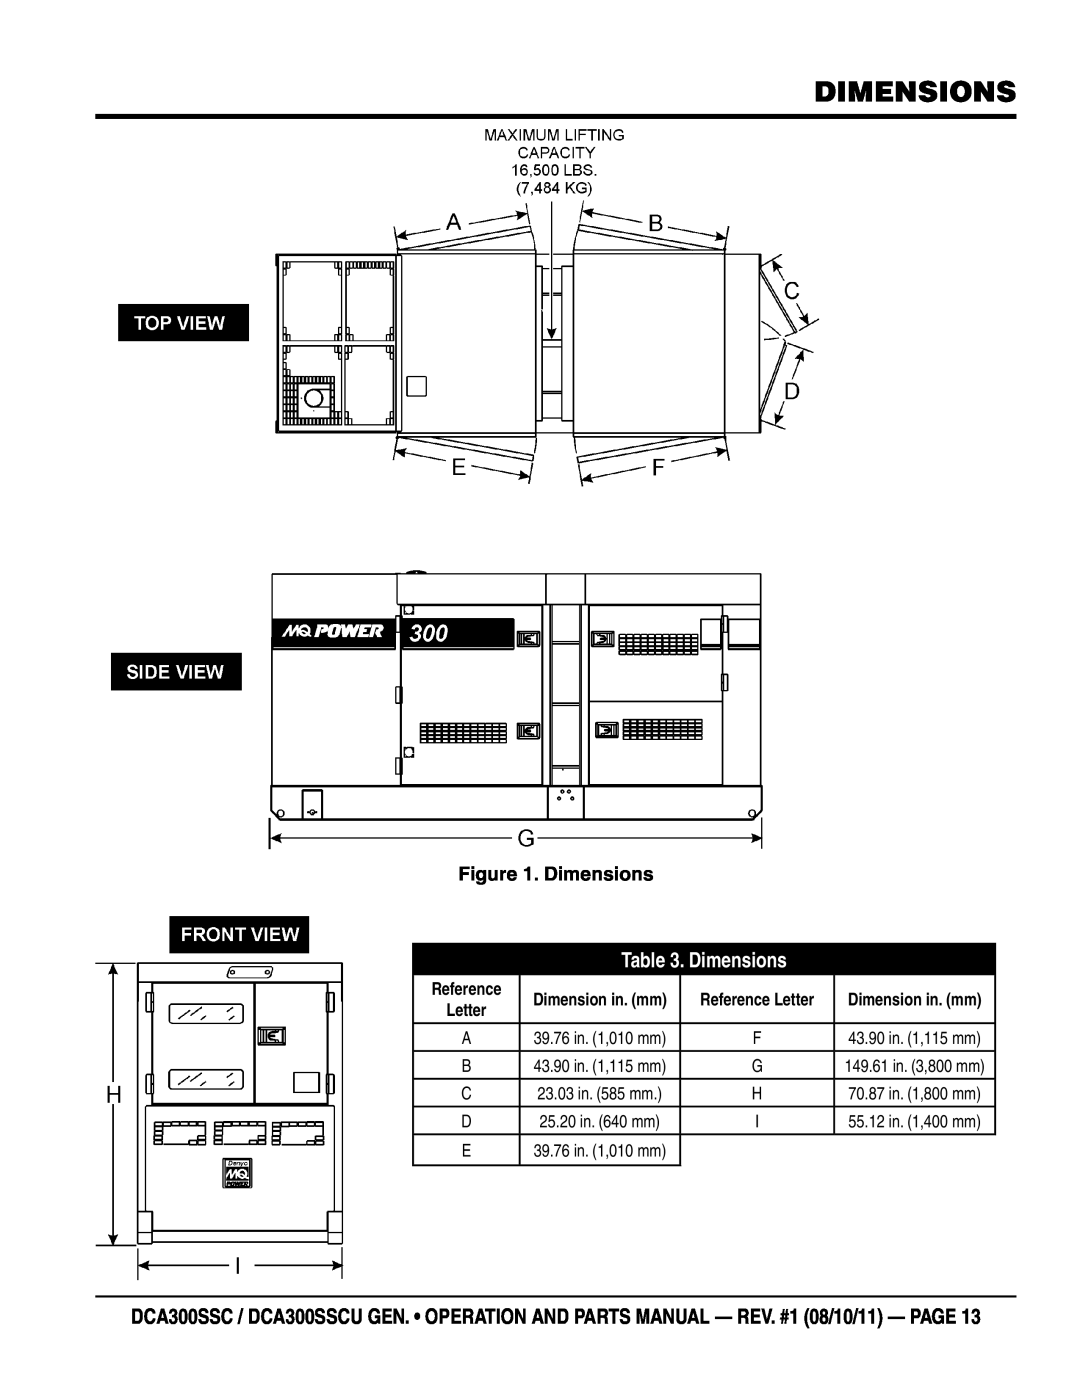 Multiquip DCA300SSCU manual Dimensions, Dimension in. mm, Reference Letter 